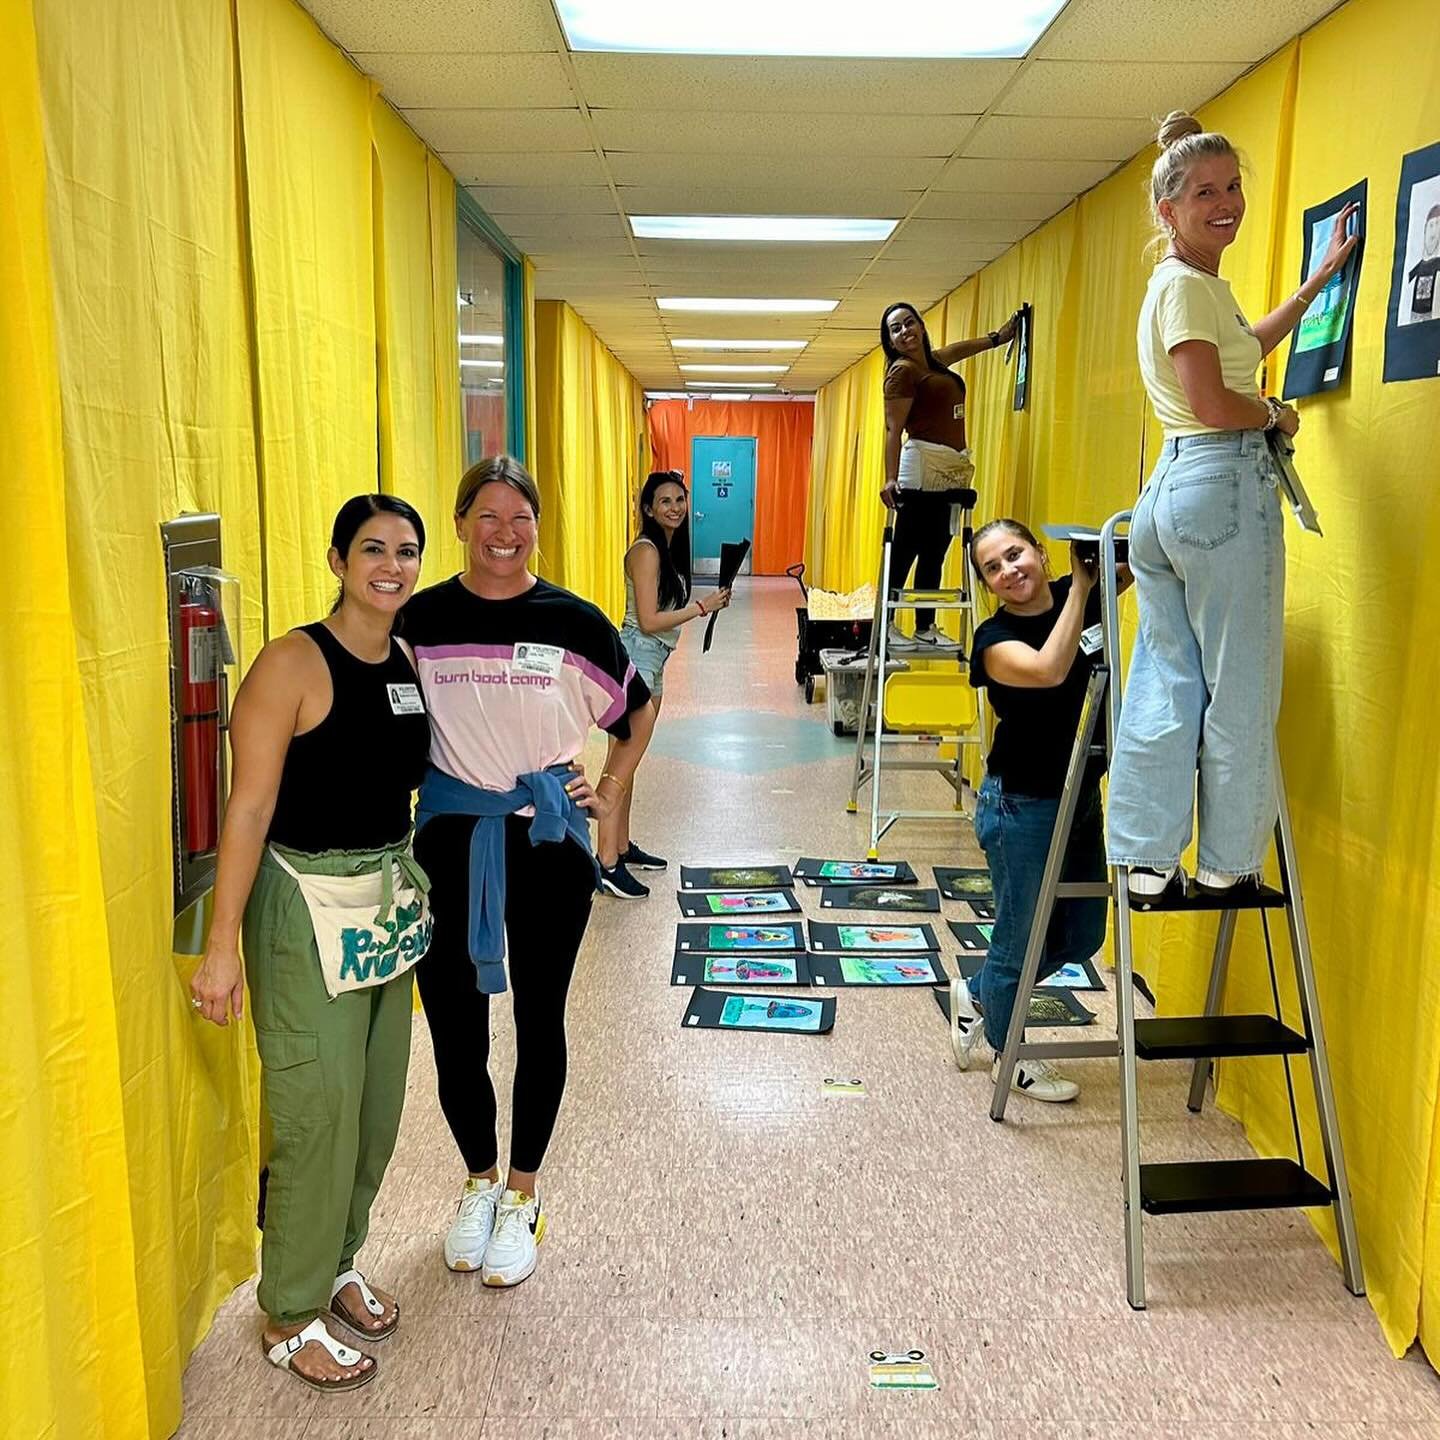 Preparations for Creative Arts Night are well underway!! This week we began preparing our student art gallery by hanging colorful fabric in the hallways and mounting artworks created by our 1,000+ students. Thank you to our amazing volunteers who hav